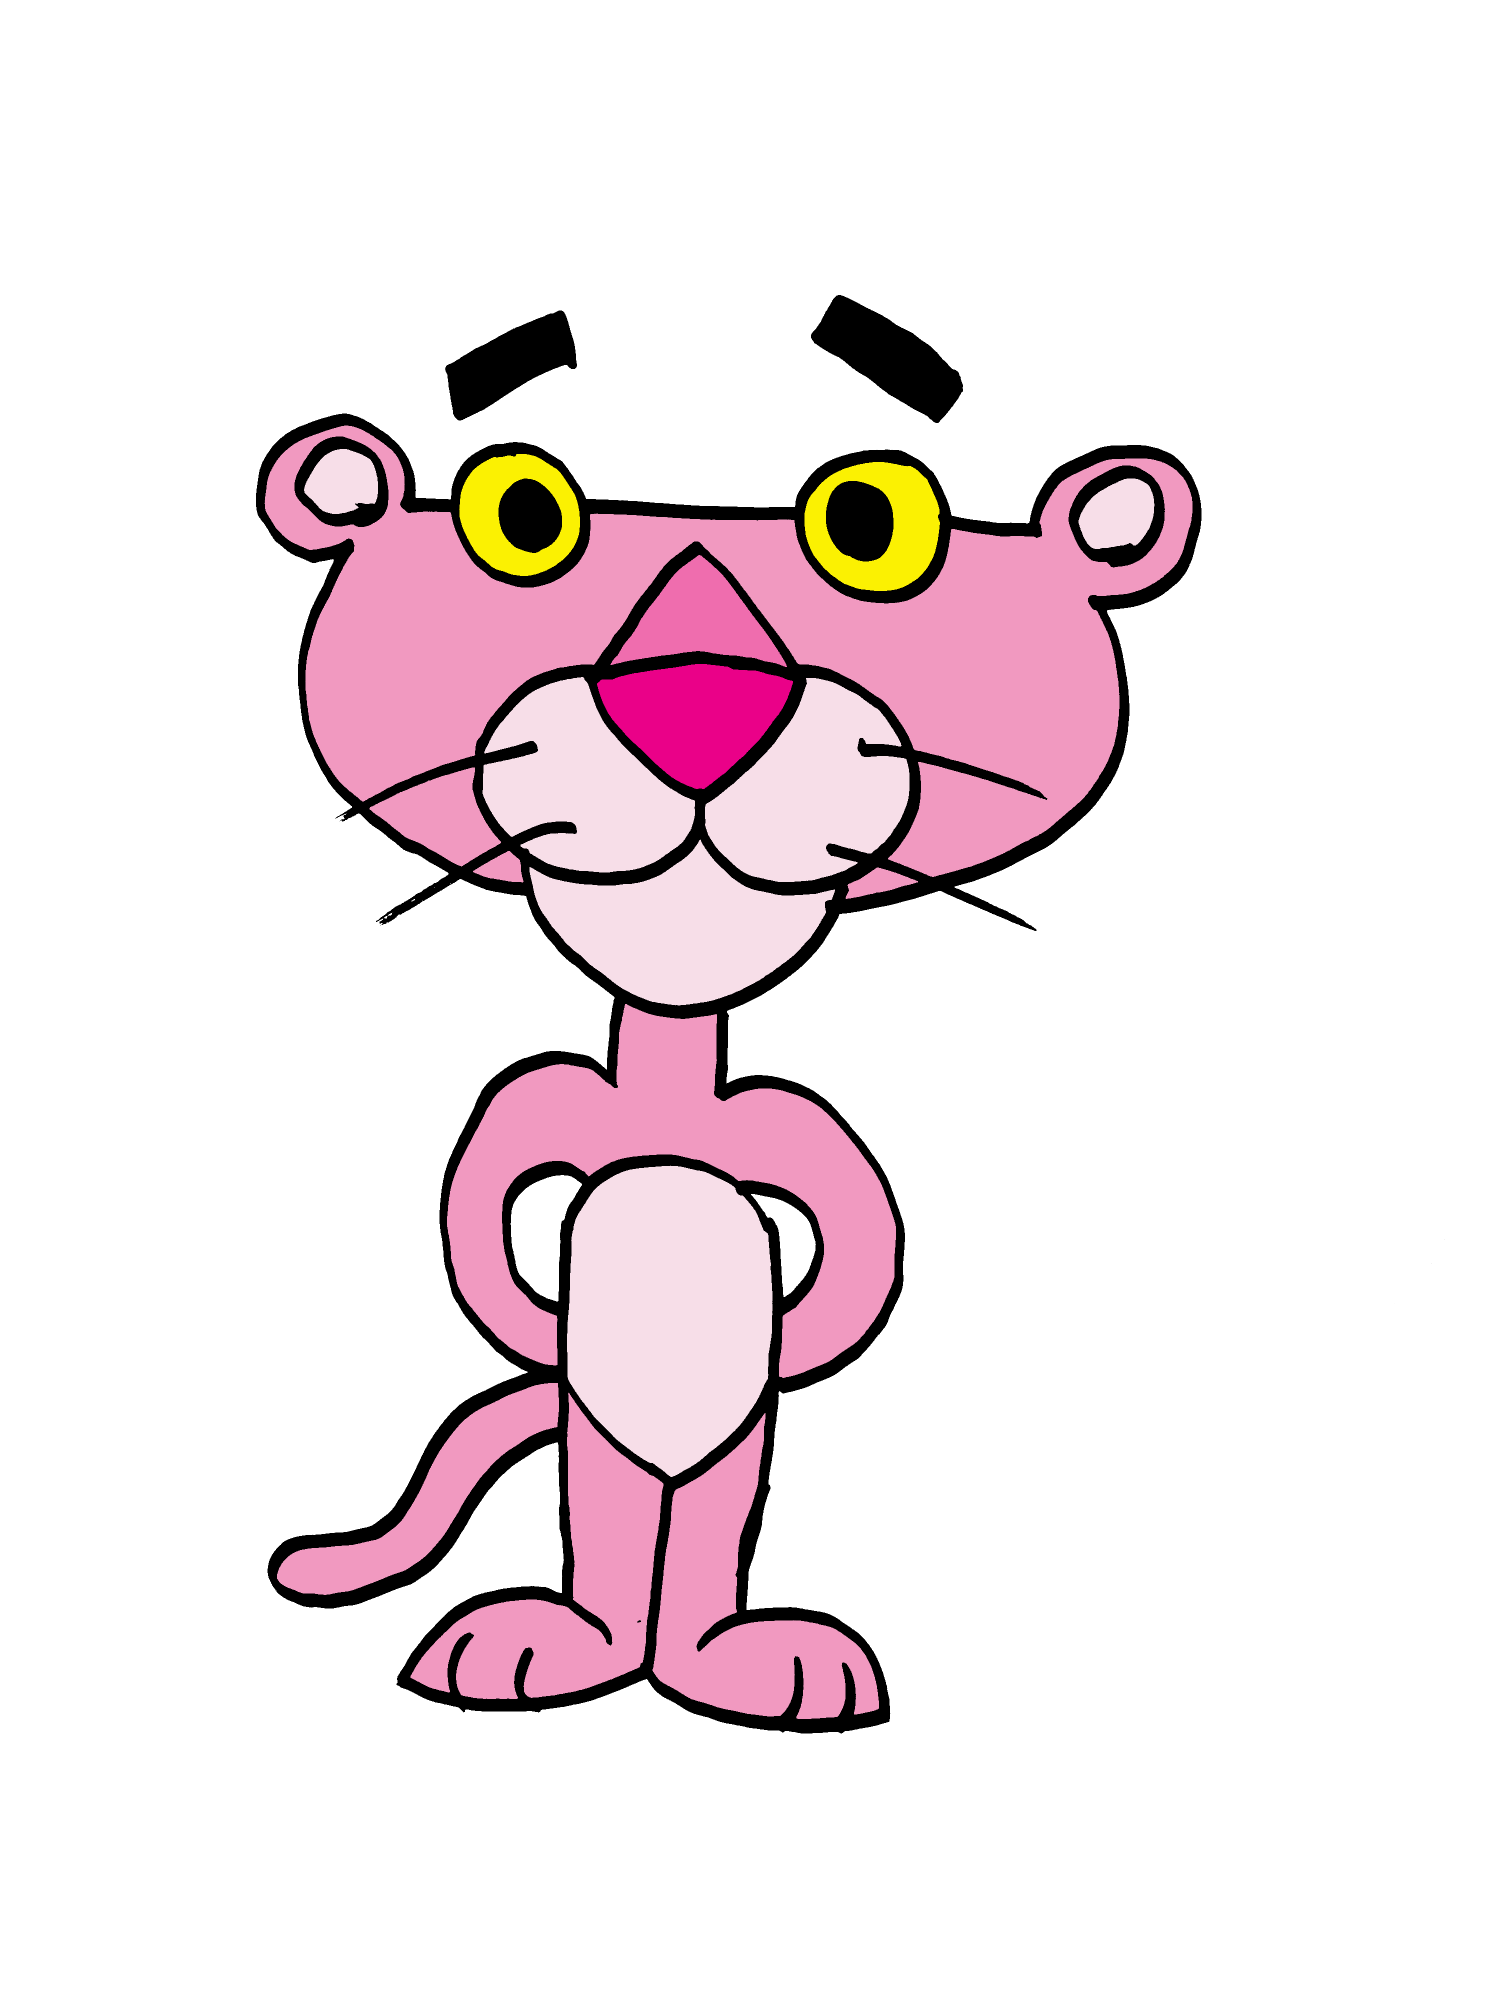 My drawing of the Pink Panther